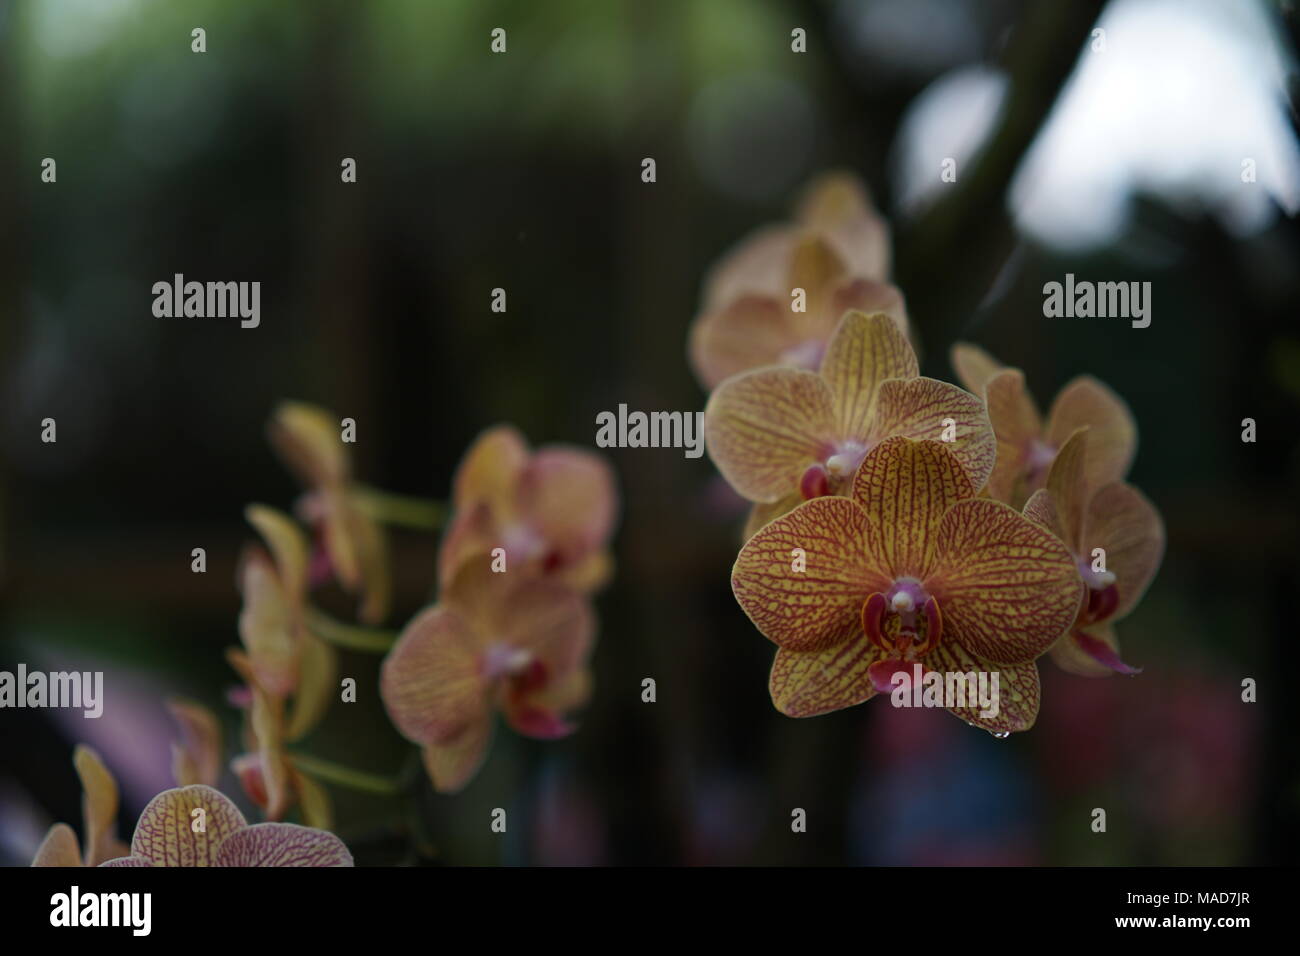 Orange coloured orchid flowers with brown stripped lines Stock Photo